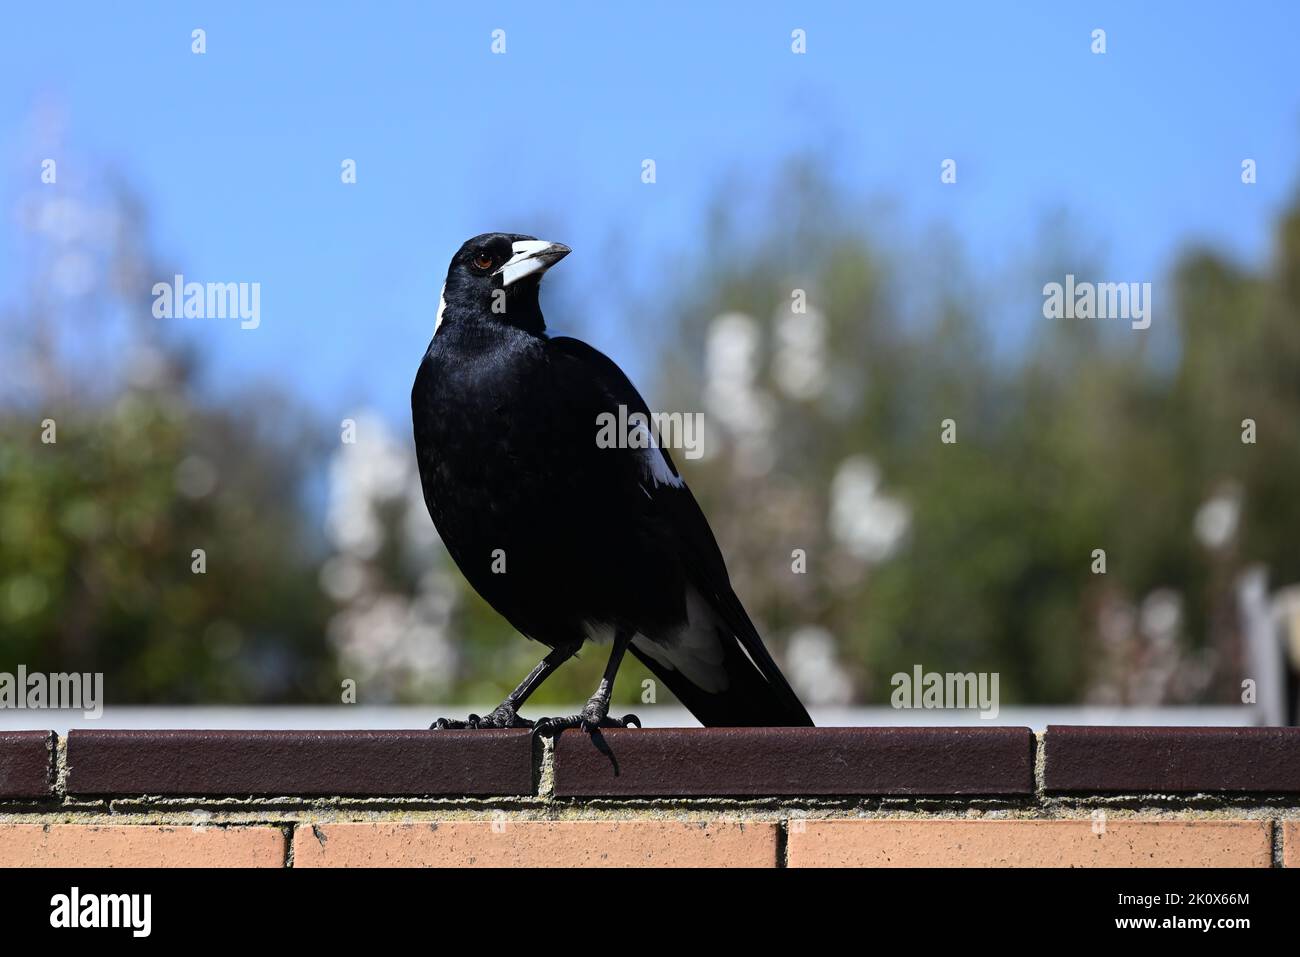 Male Australian magpie standing atop a brick wall in a suburban area, its head to the right as it looks into the distance Stock Photo